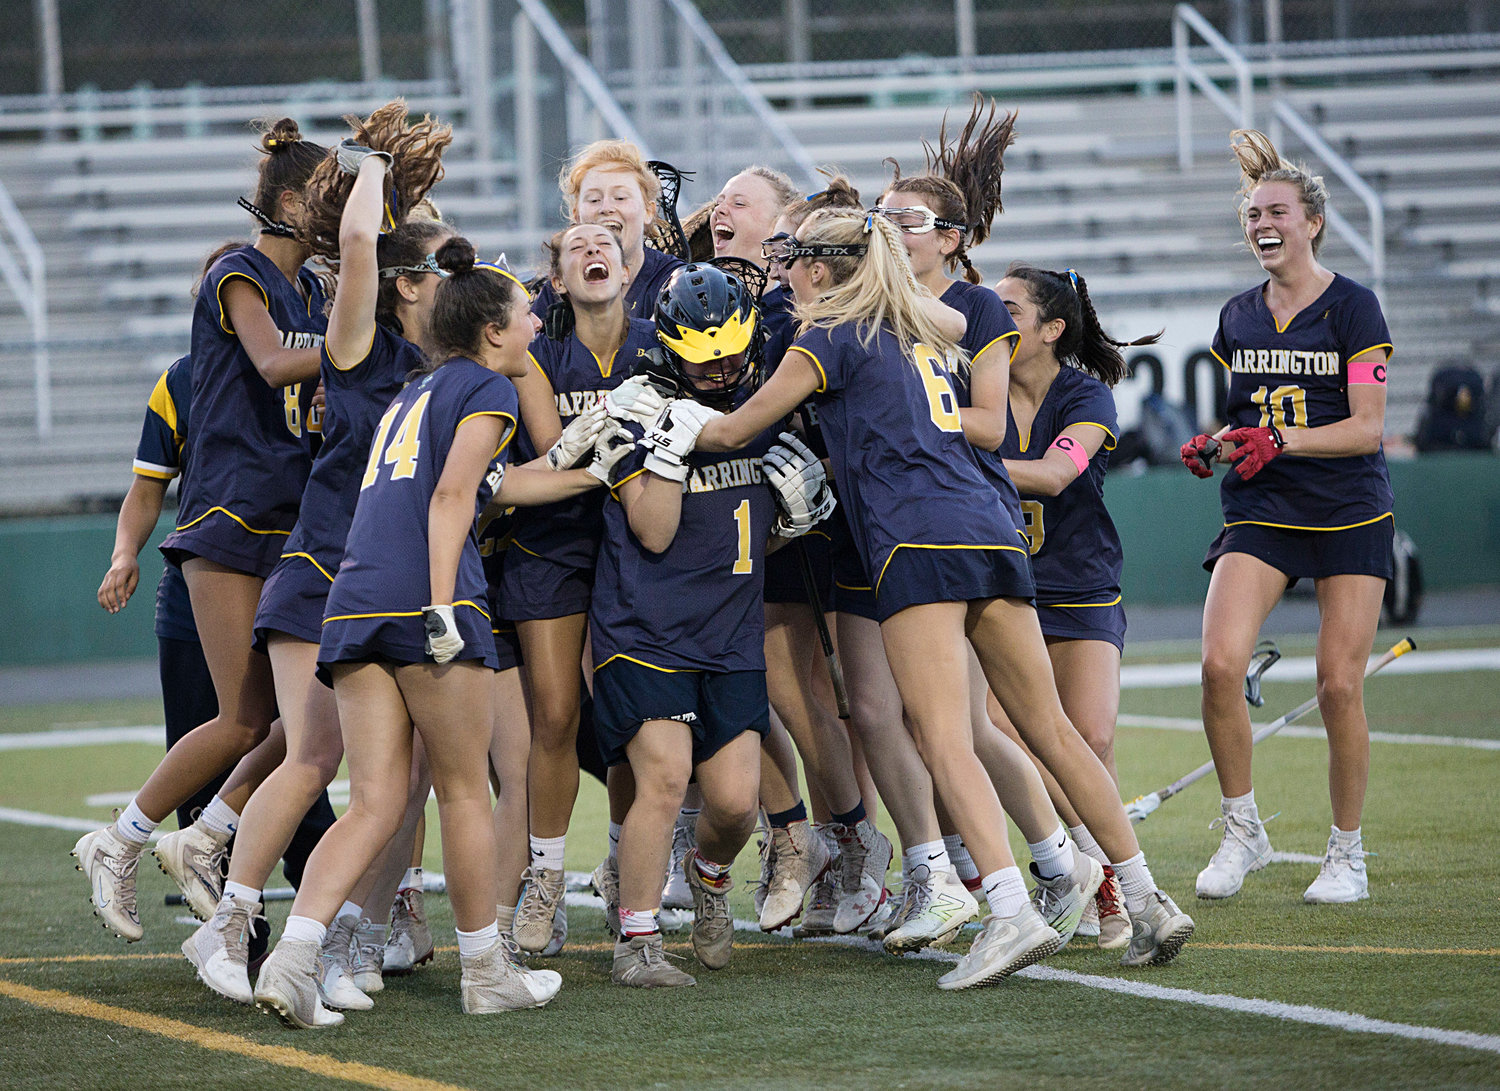 The Eagles swarm around goalie Audrey Keefe after beating Moses Brown, 10-8, in the Division 1 girls lacrosse finals on Saturday.